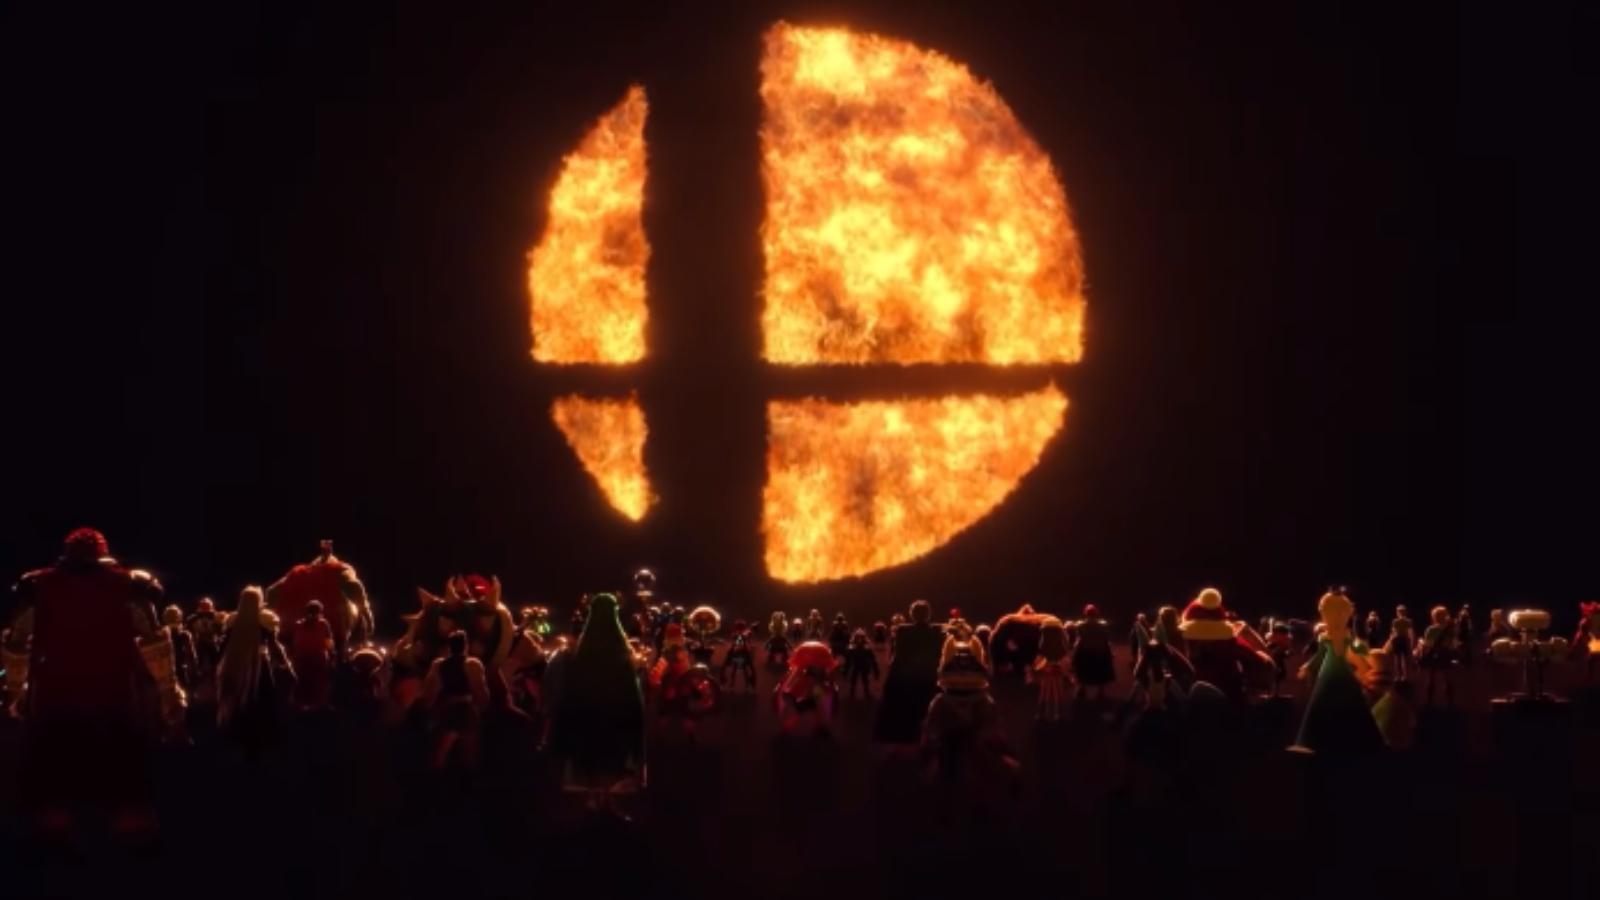 super smash bros fighters gather looking at the logo